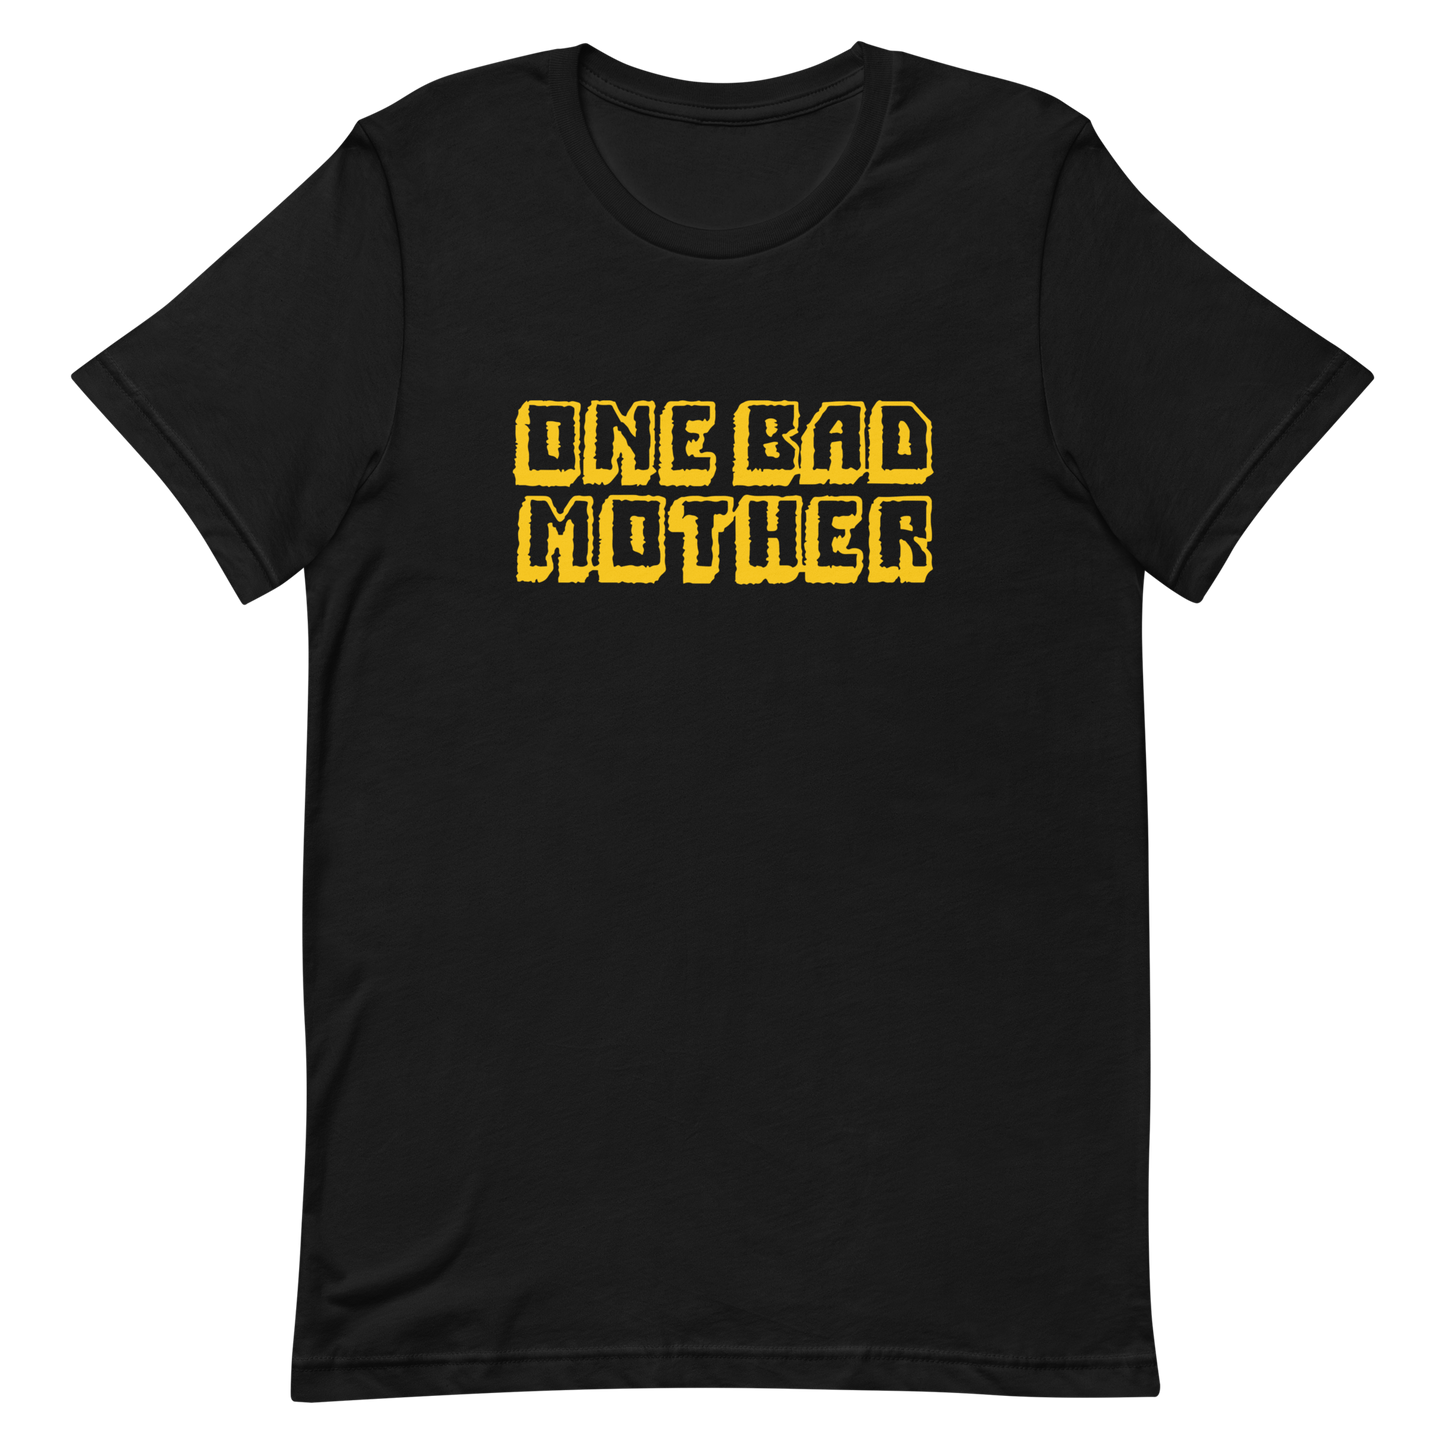 One Bad Mother logo T-shirt